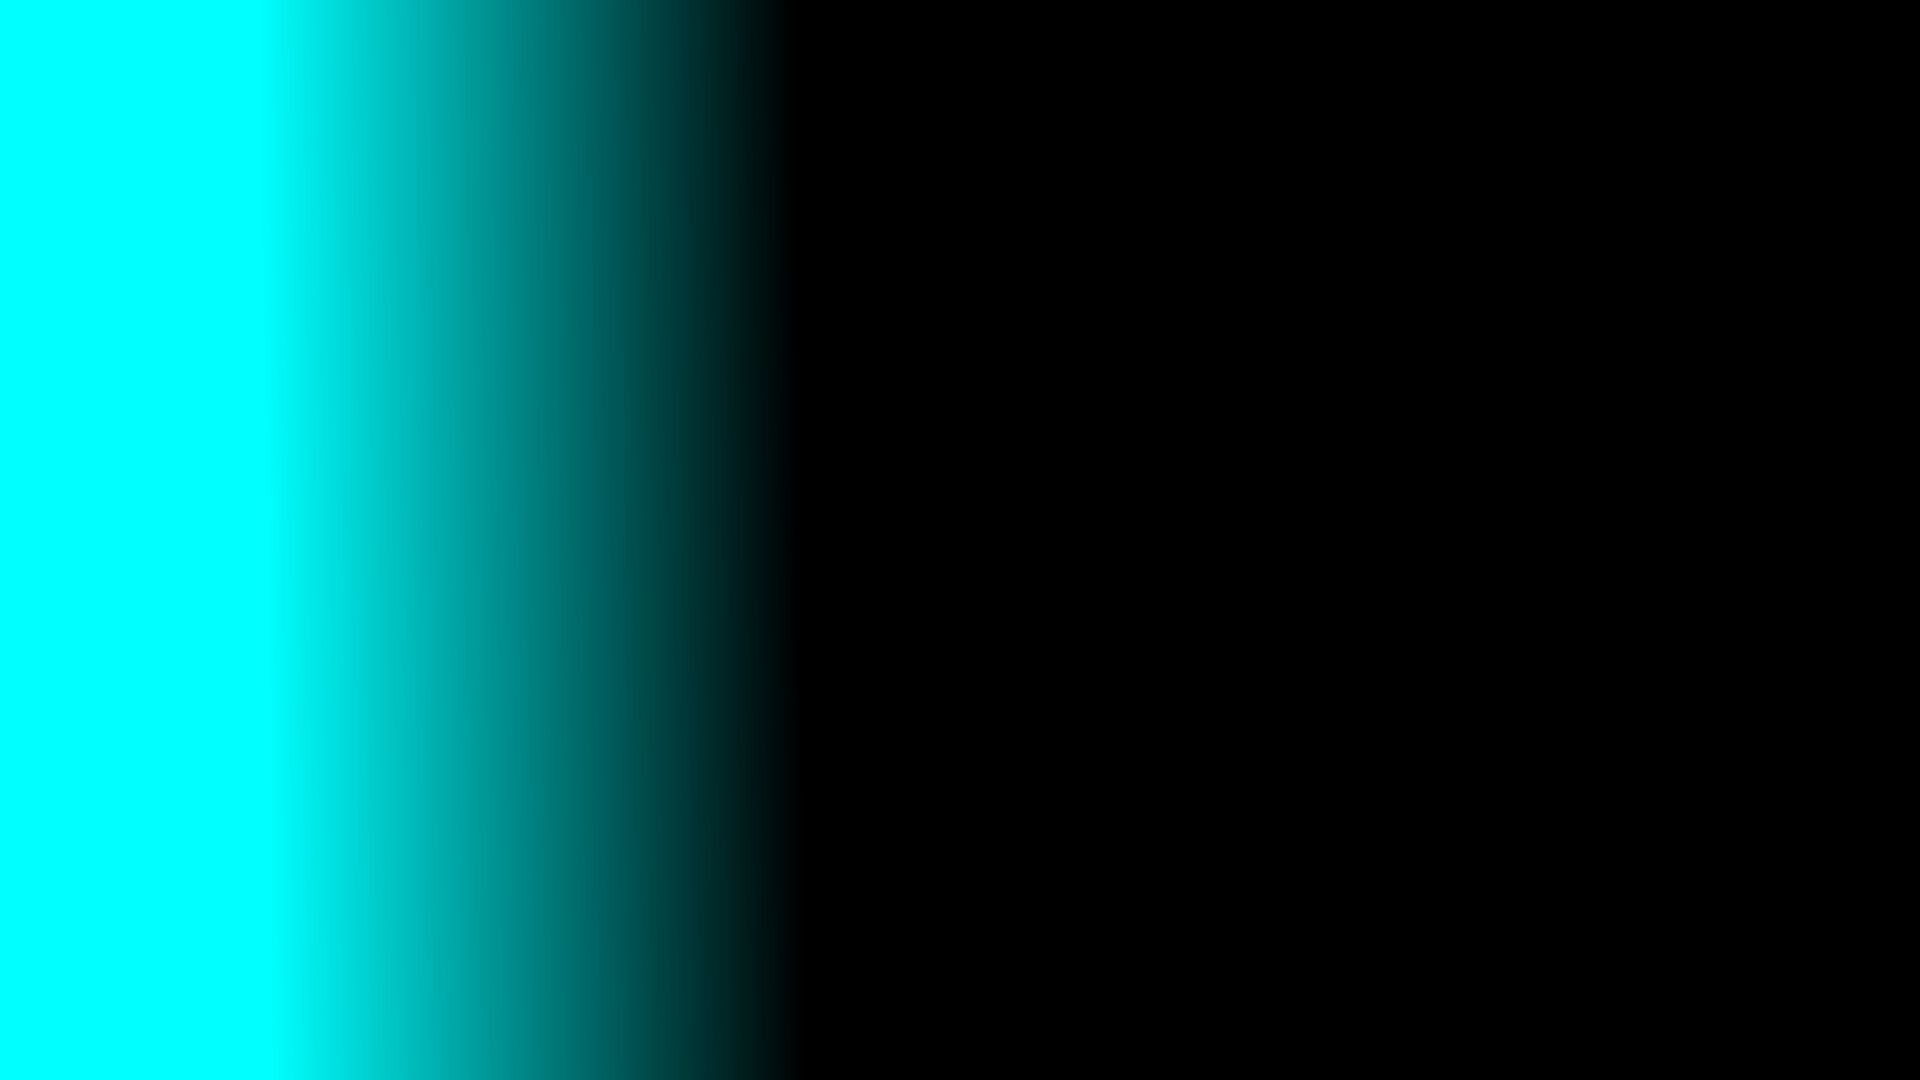 Black and Teal Wallpapers - 4k, HD Black and Teal Backgrounds on